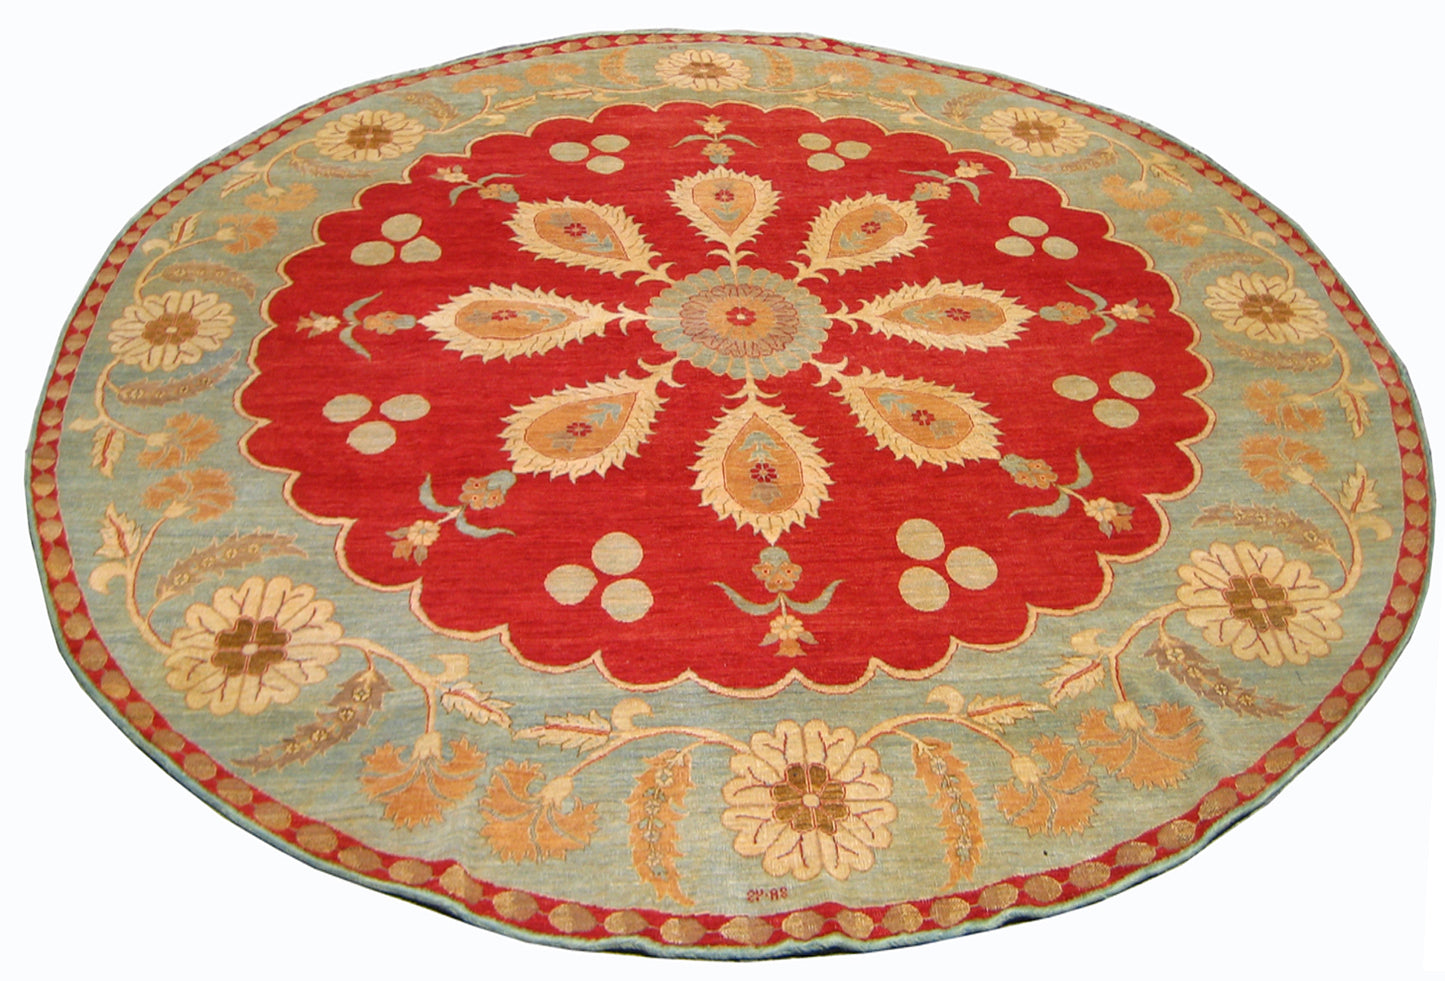 10.0 x 10.0 Hand-Knotted Floral Pattern Ariana Traditional Round Area Rug